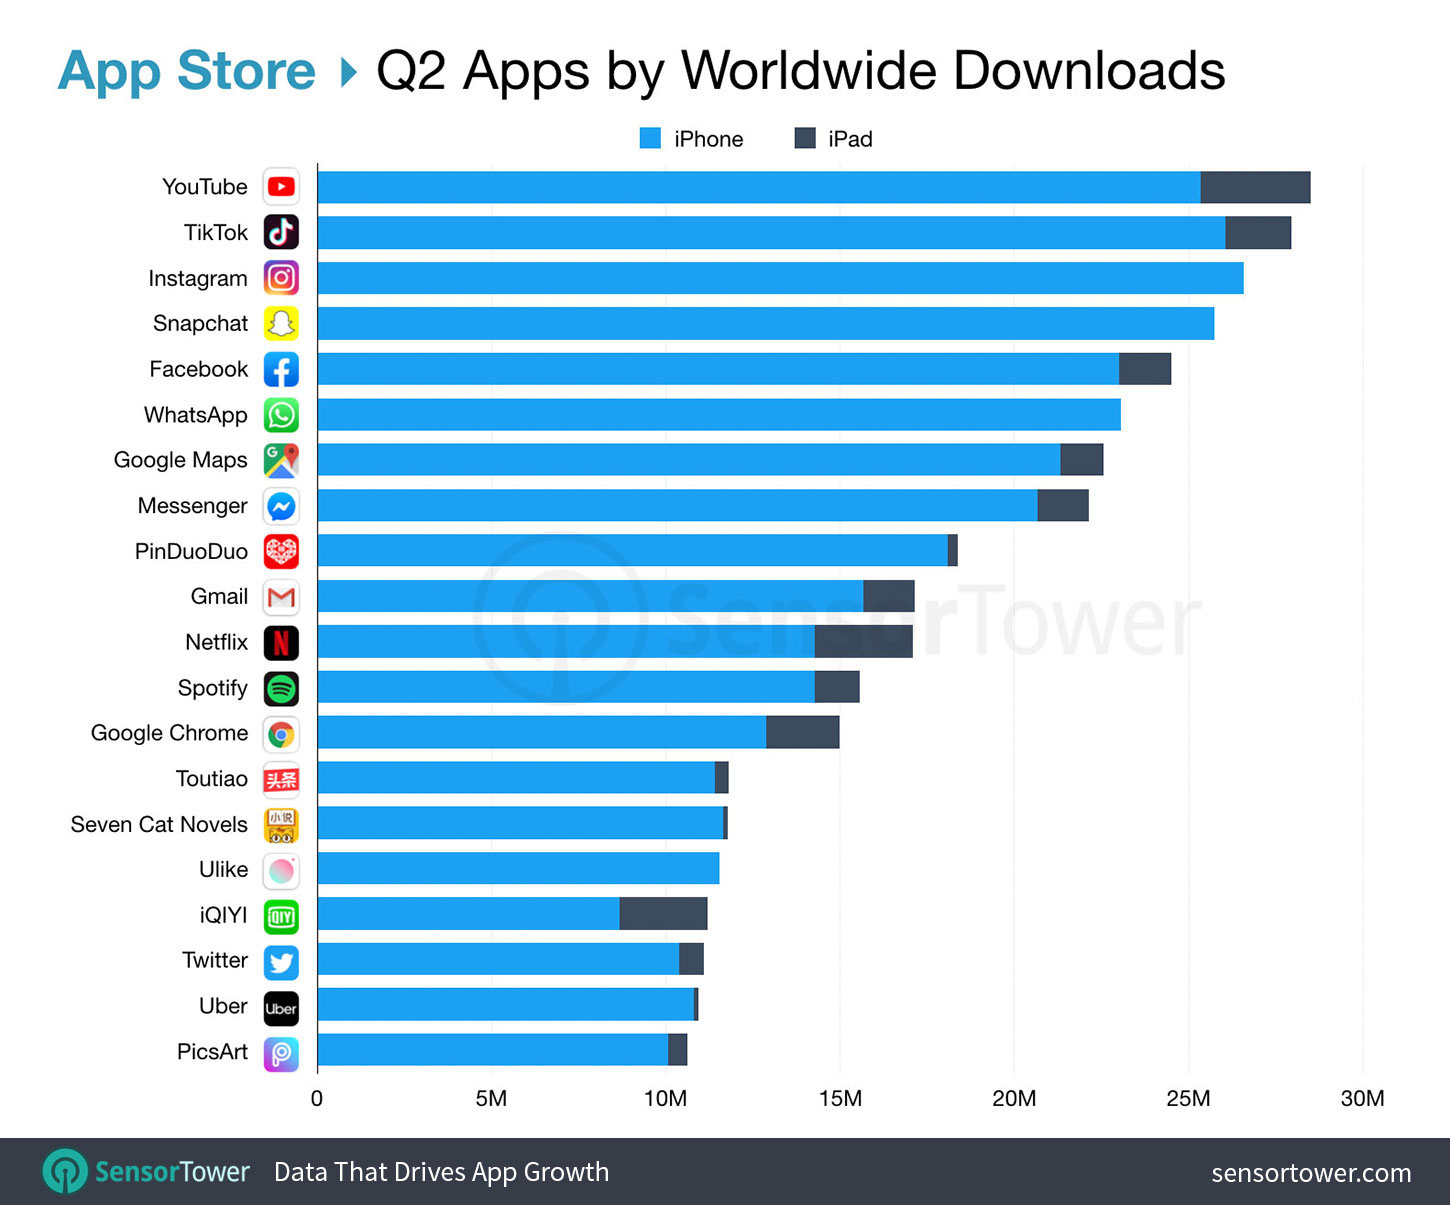 Top Apps Worldwide for Q2 2019 by Downloads